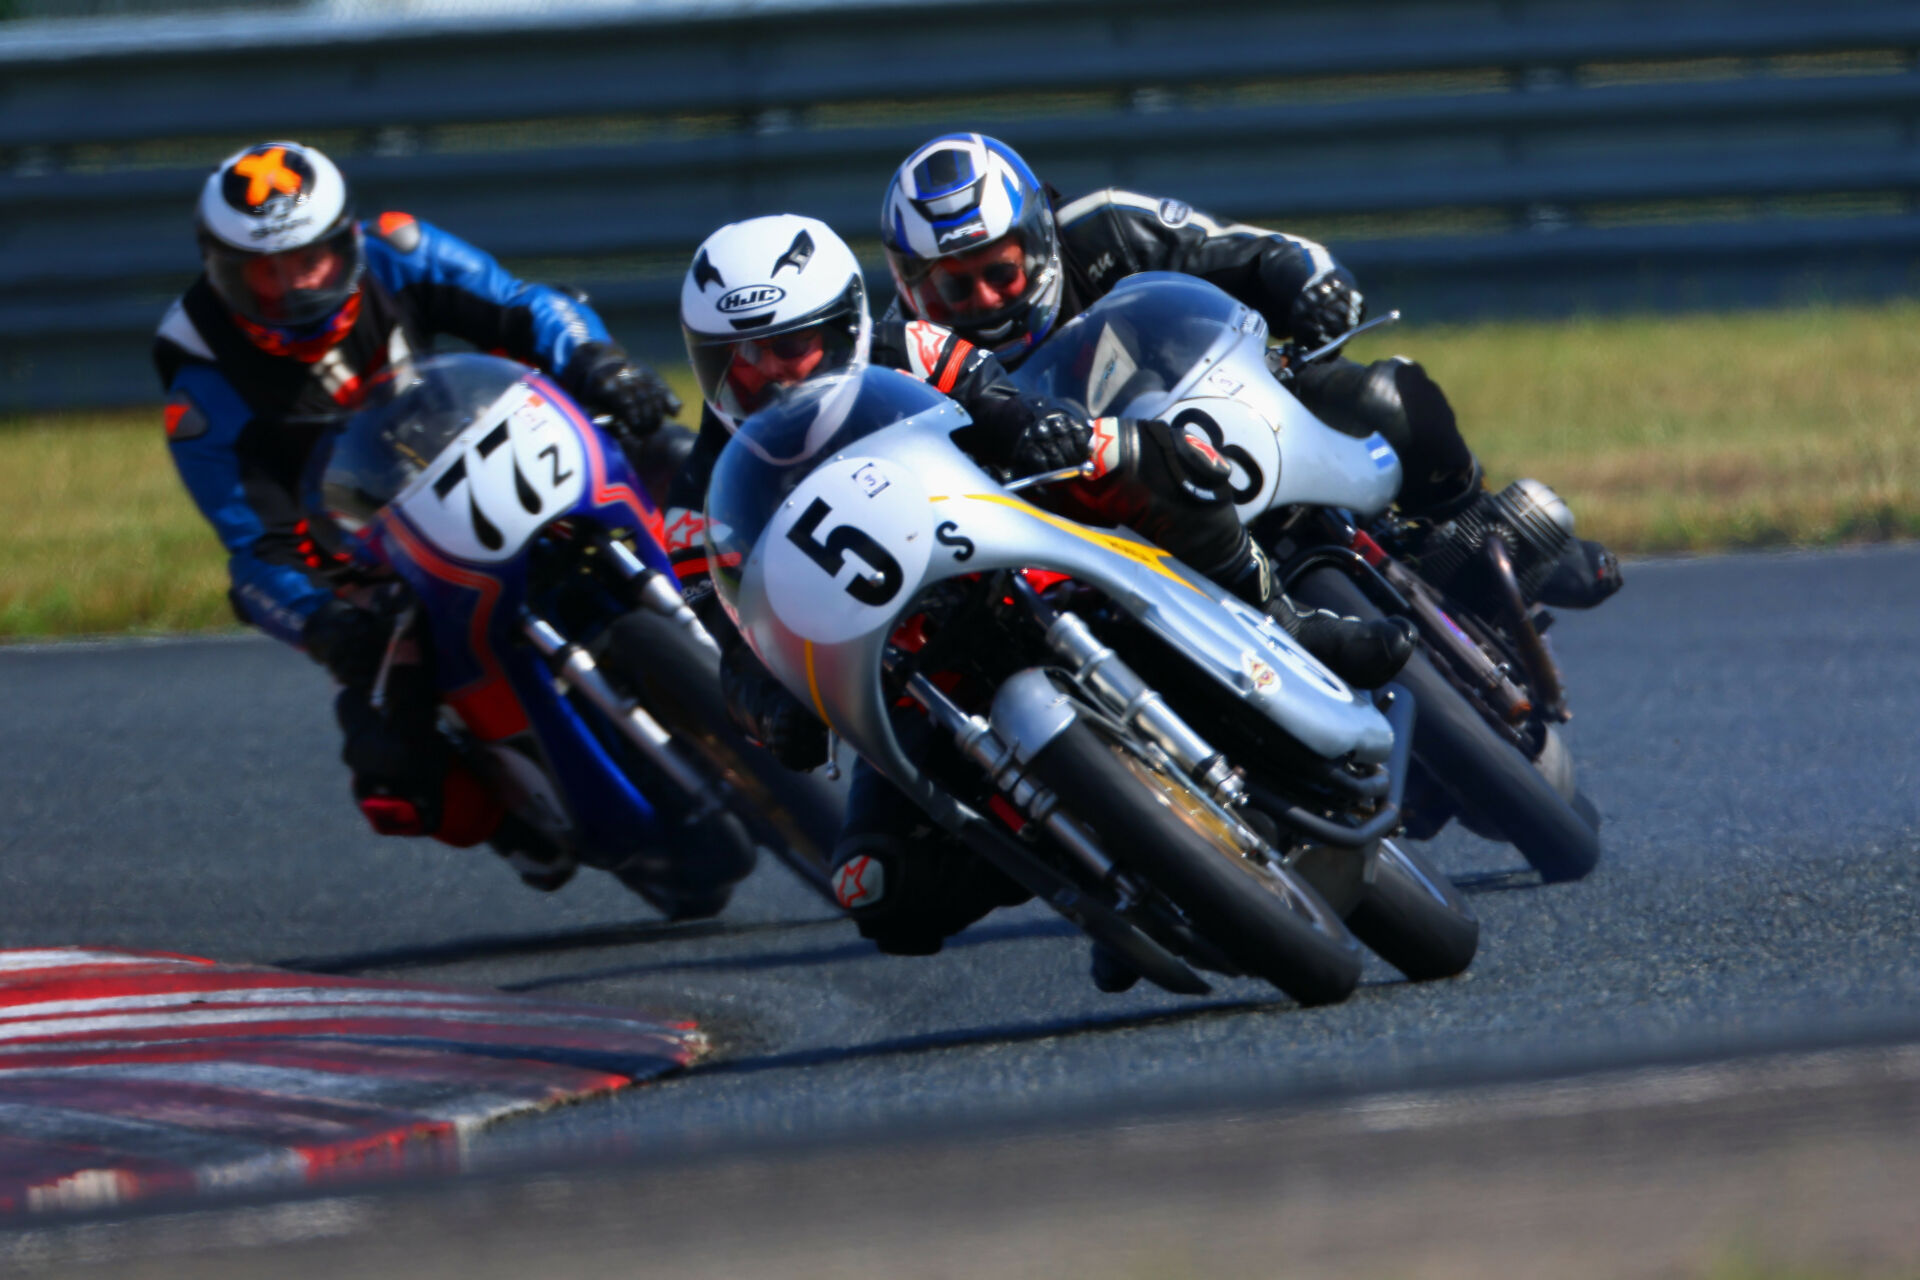 AHRMA racers Martin Morrison (5s) and Dan Sokolich (77z) in action at New Jersey Motorsports Park. Photo by etechphoto.com, courtesy AHRMA.